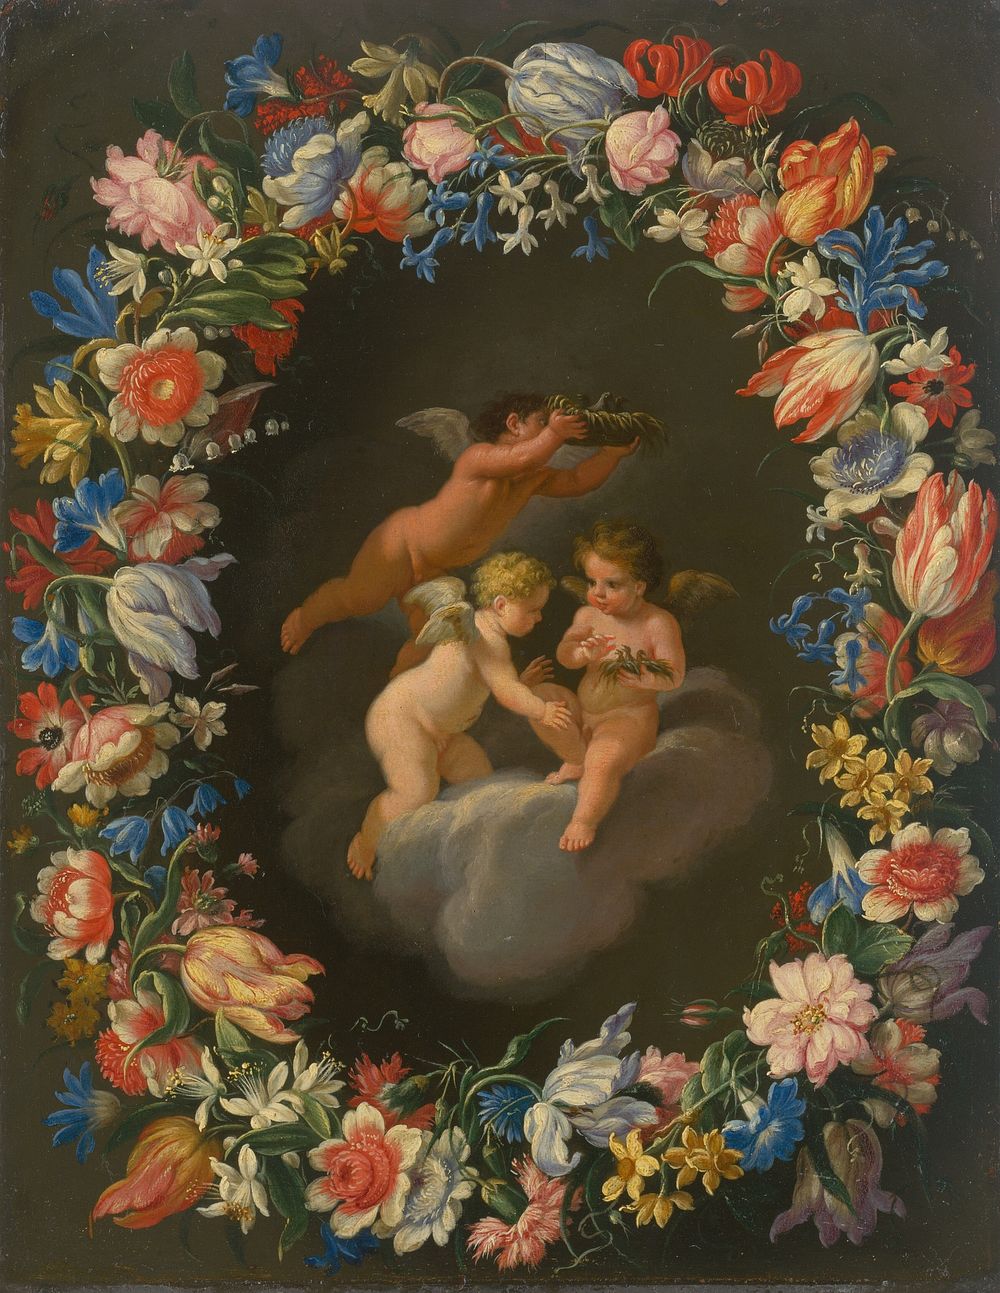 Angels in a flower wreath i.